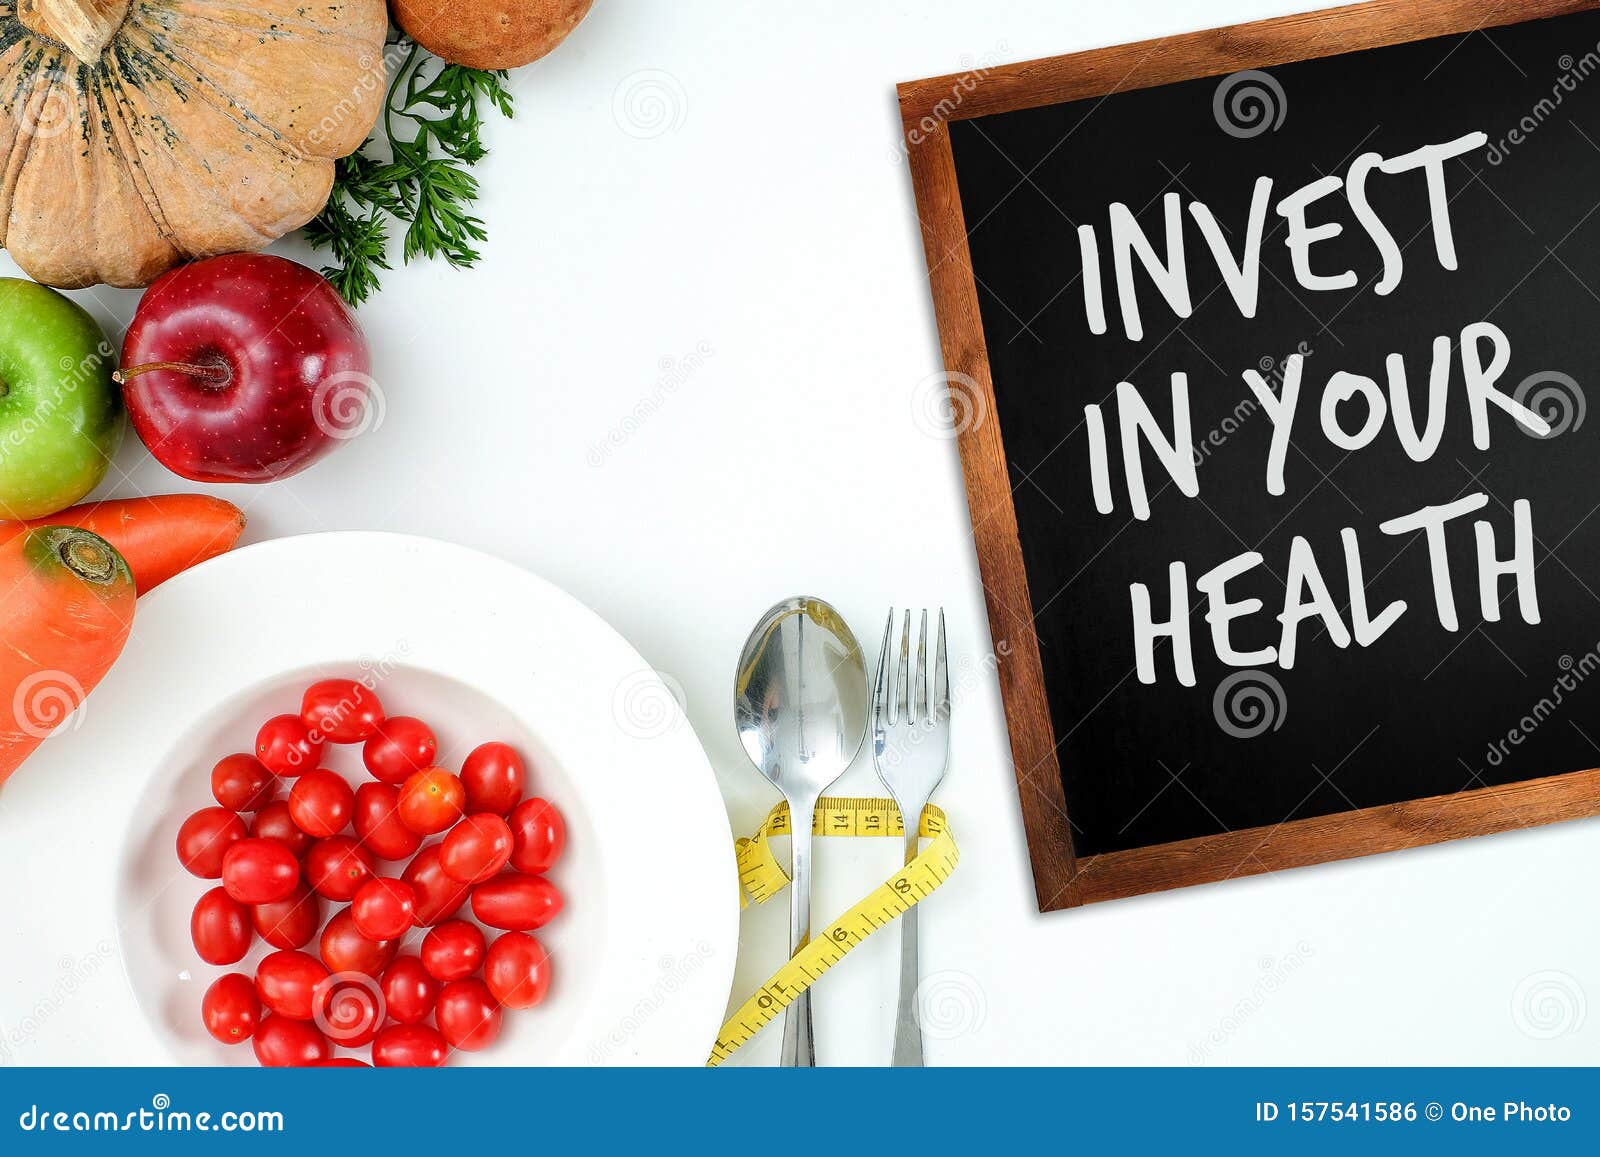 Invest in Your Health , Healthy Lifestyle Concept with Diet and Fitness ...